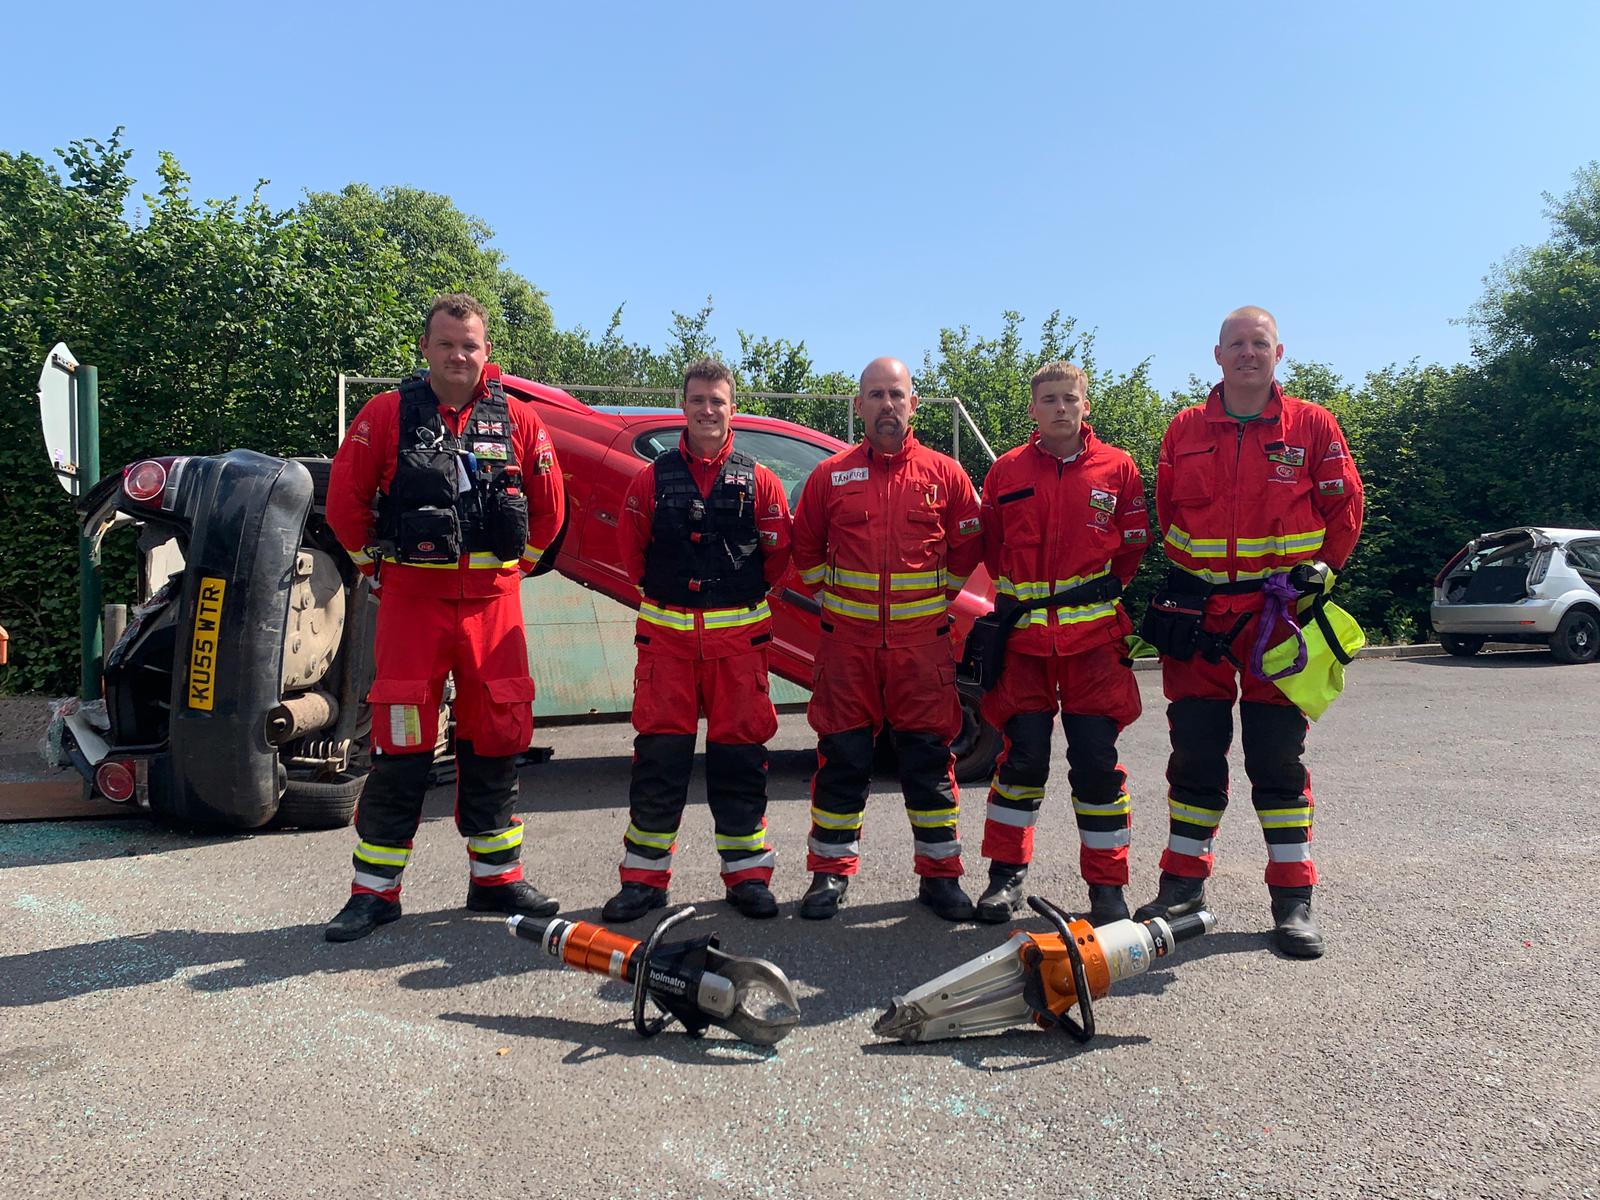 Members of the SWFRS Dragons Extrication team.